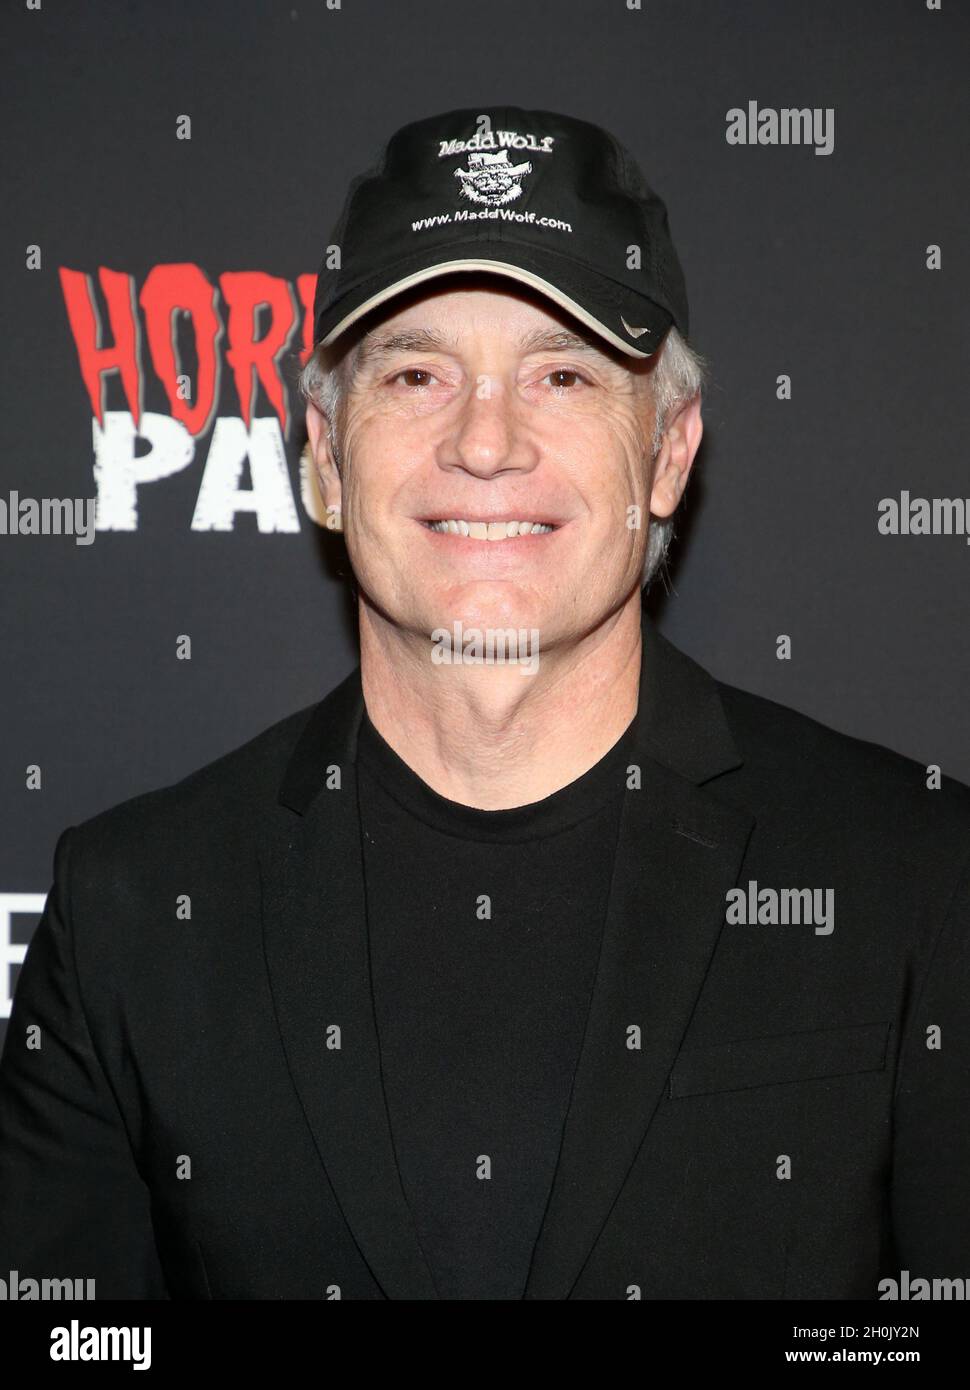 Hollywood, Ca. 12th Oct, 2021. George Wolf, at the 21st Screamfest Opening Night Screening Of The Retaliators at Mann Chinese 6 Theatre in Hollywood, California on October 12, 2021. Credit: Faye Sadou/Media Punch/Alamy Live News Stock Photo